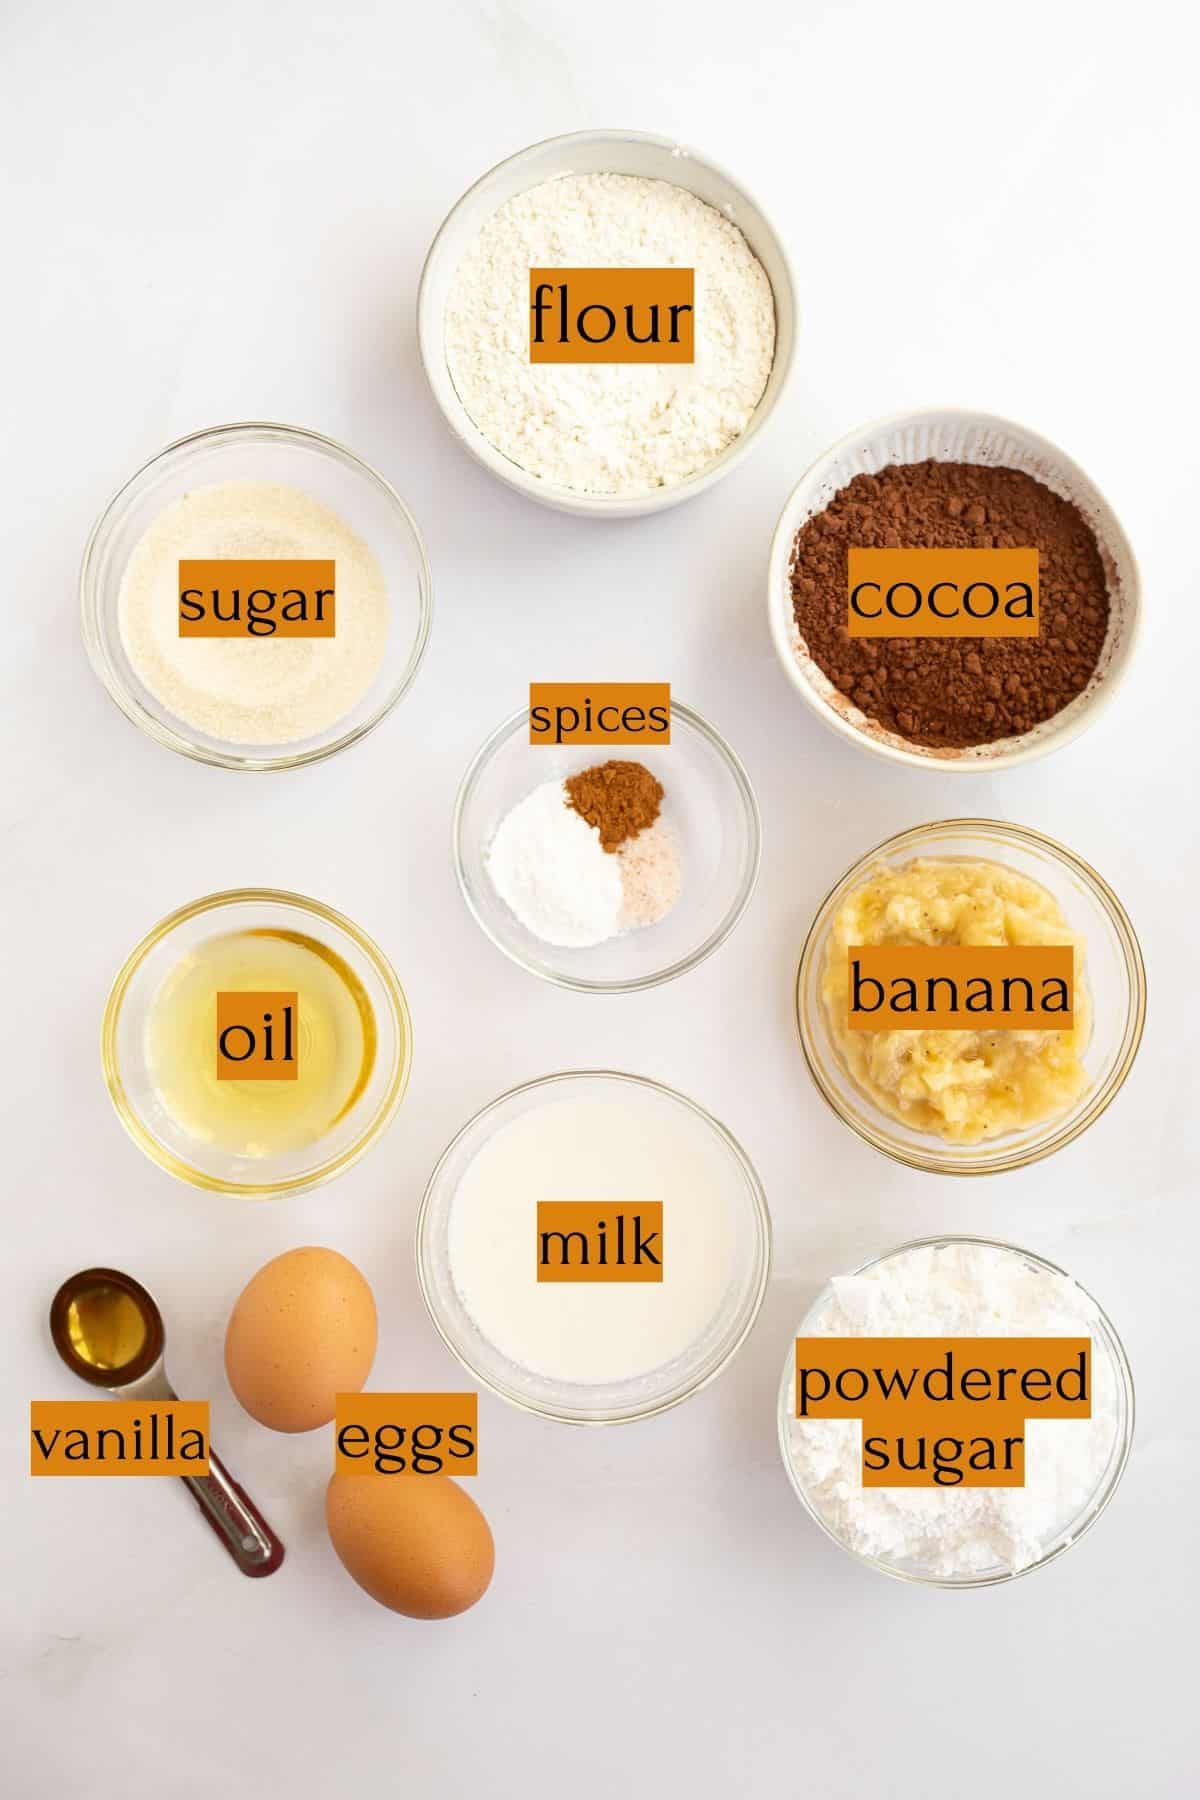 ingredients to make banana bread donuts labeled with orange and black text boxes.